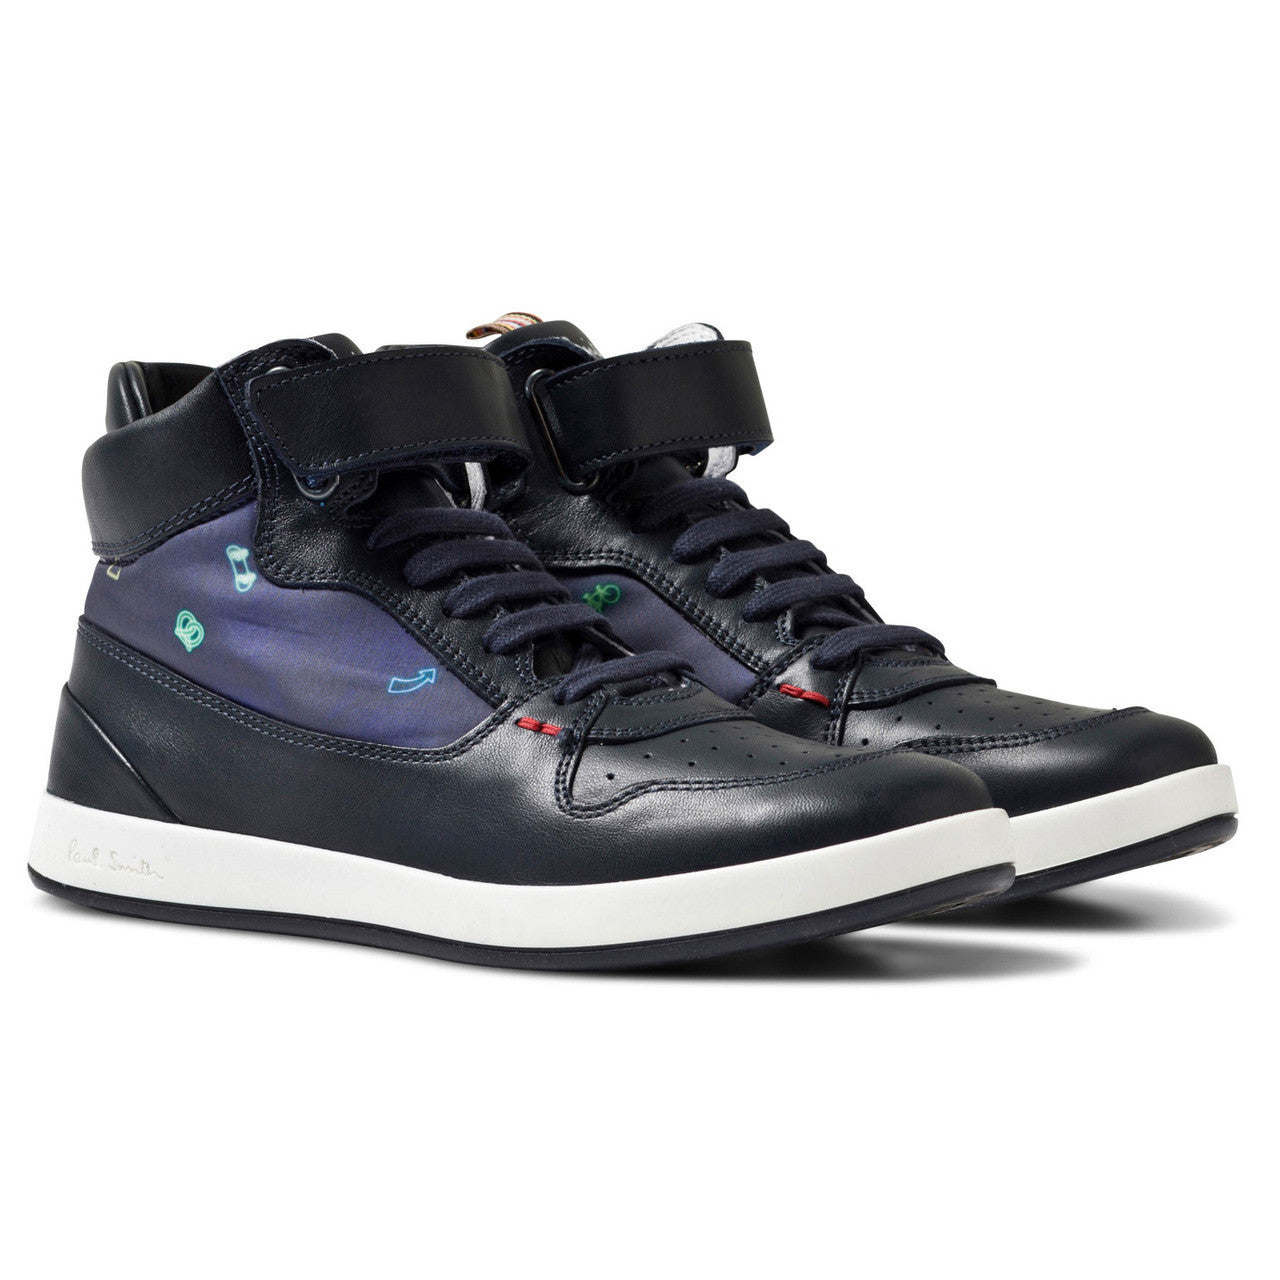 Paul Smith High Top Sneakers 5I81532 